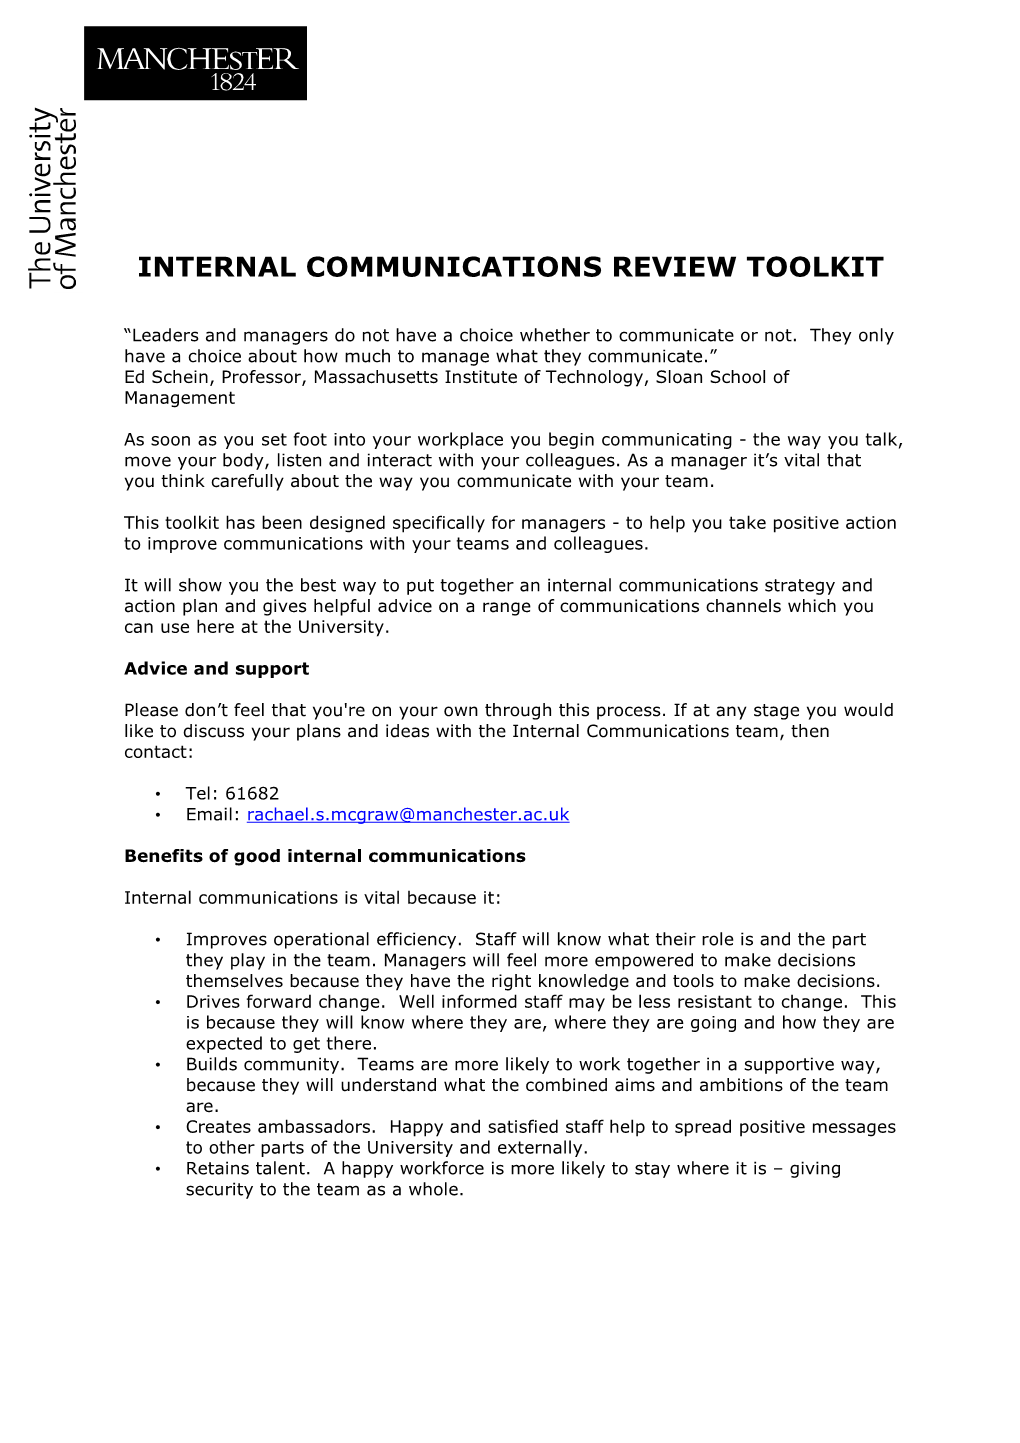 Internal Communications Review Toolkit